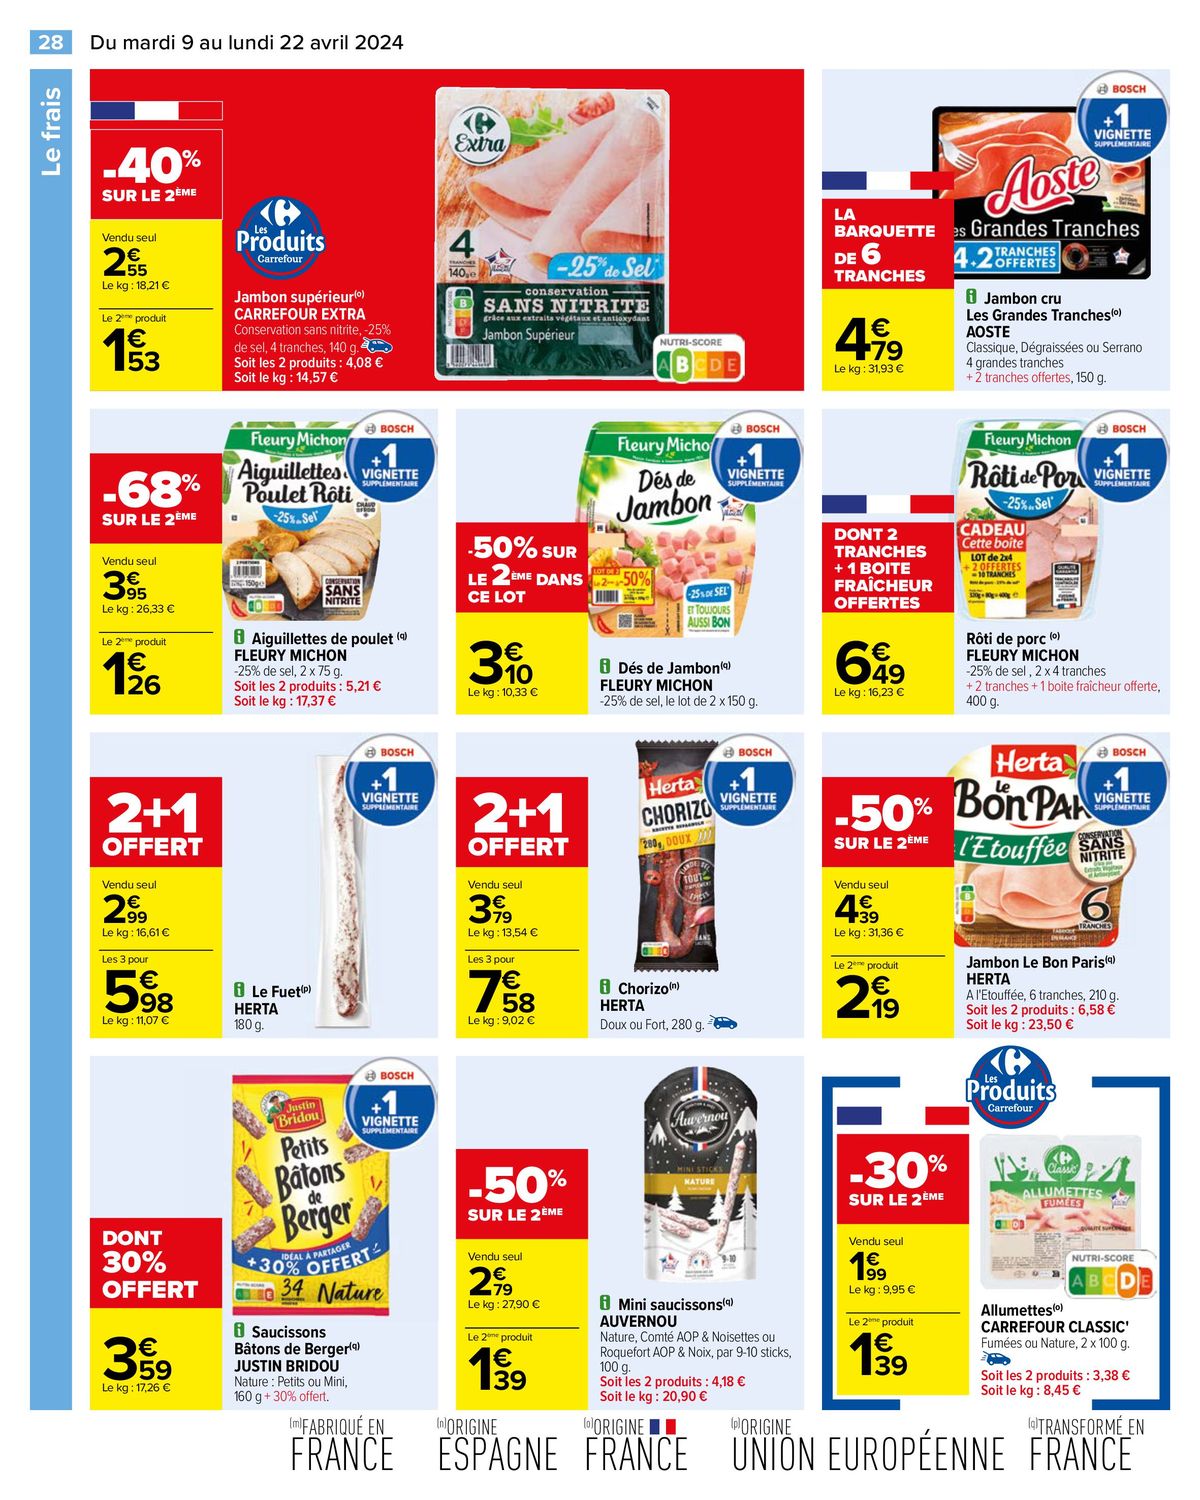 Catalogue OFFERT Carrefour Drive , page 00030